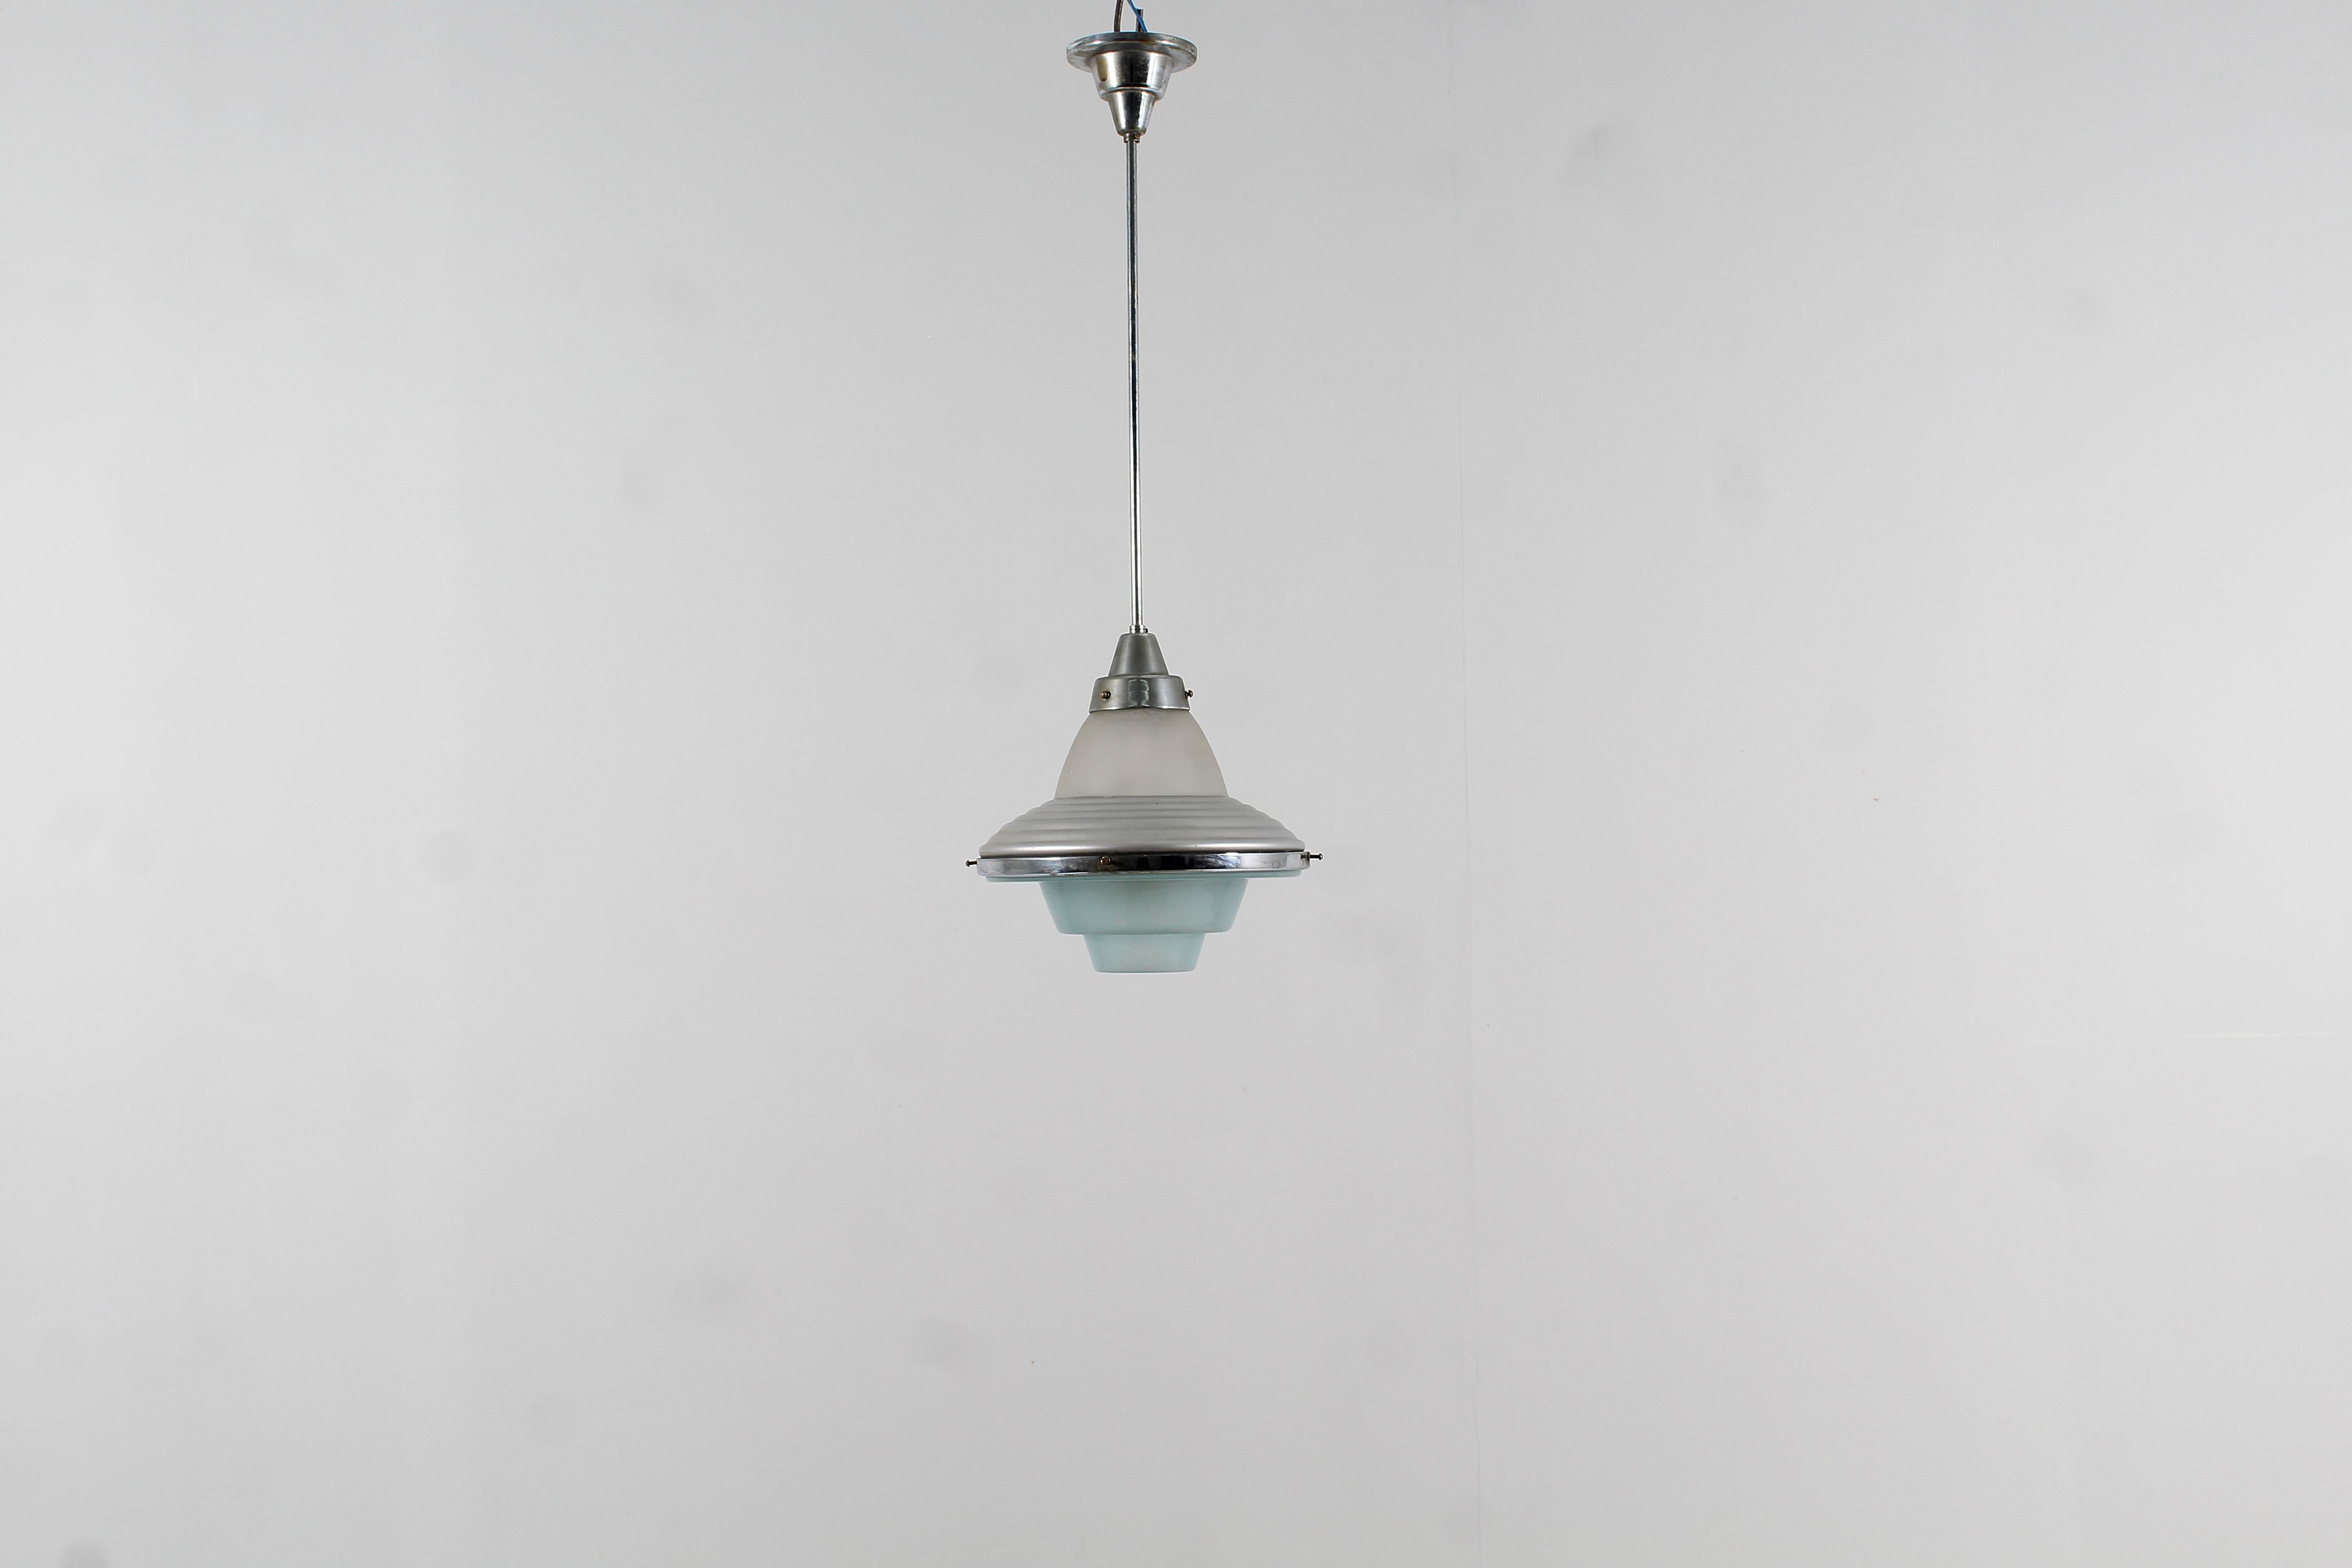 Suspension lamp in chromed metal and satin glass, white above, blue below, with diffuser geometric shaped attributable to Louis Kalff for Philips, Netherlands, 1950s. There are defects in the chrome visible in photos.
Wear consistent with age and